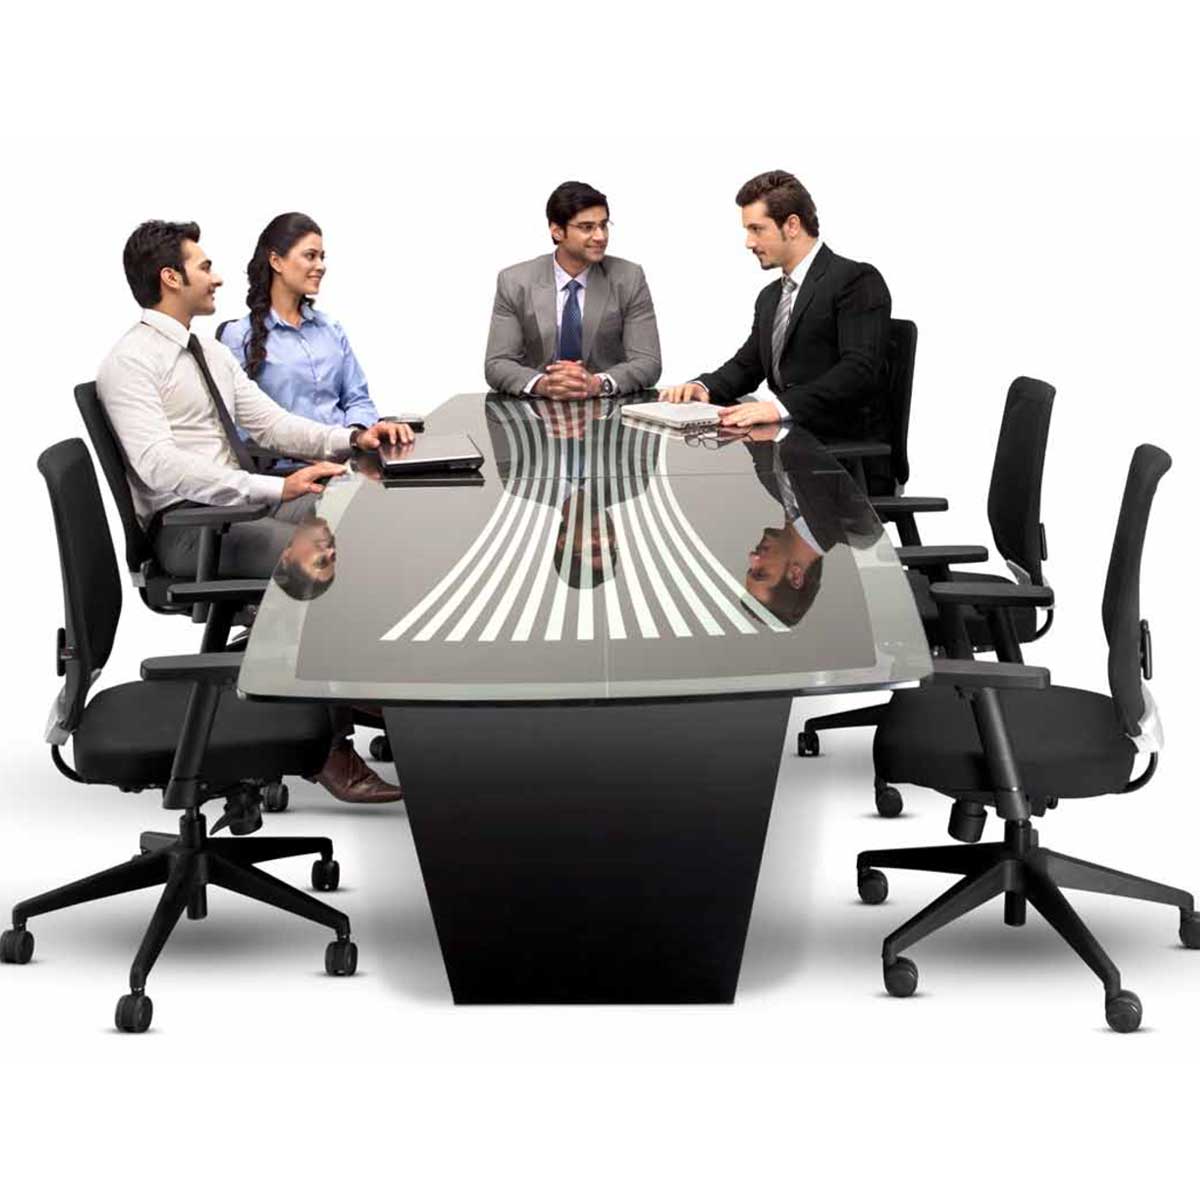 Conference table Manufacturers, Suppliers in Karkardooma